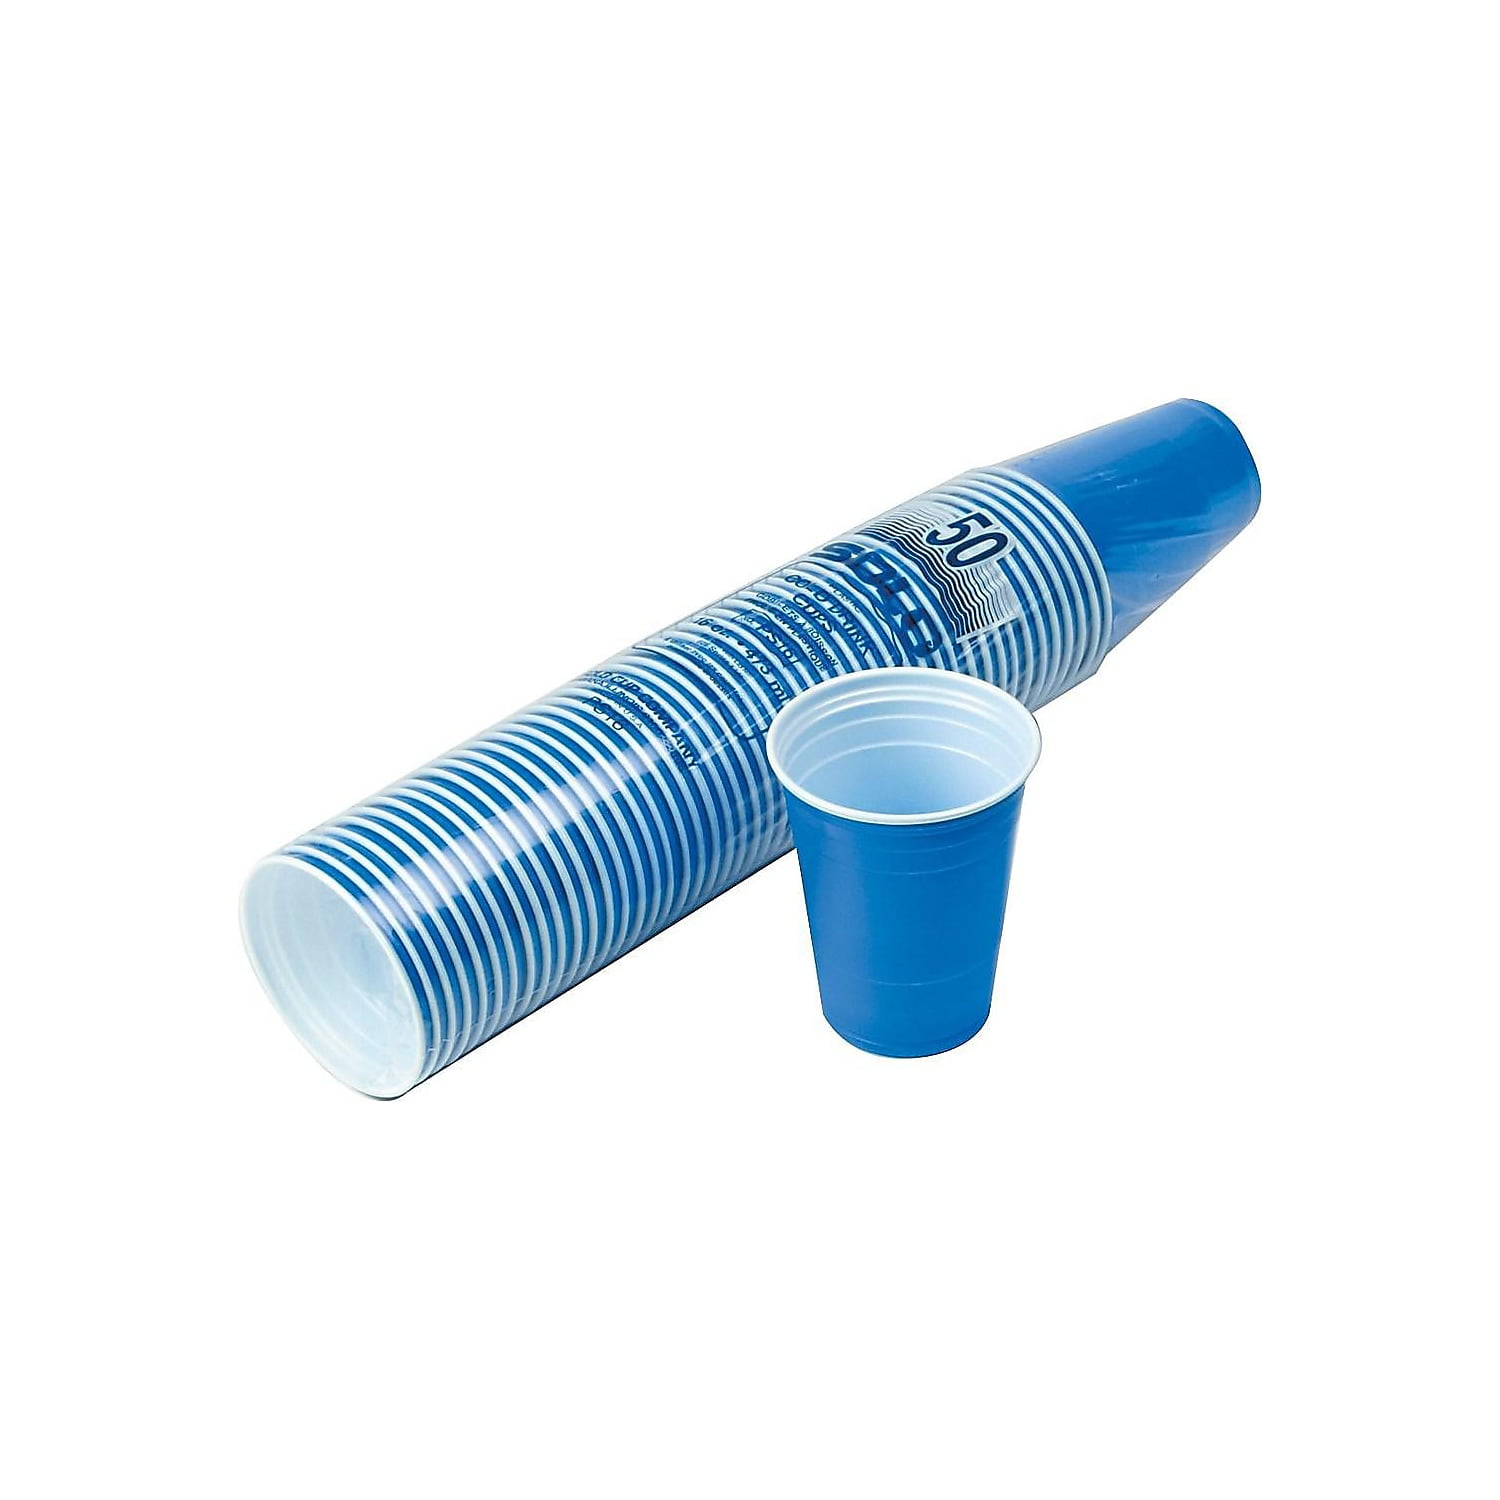 True Blue Party Cups, Disposable Cups, Drink Cups for Cocktails and Beer, 16  Ounce Capacity, Plastic, Blue, Set of 50